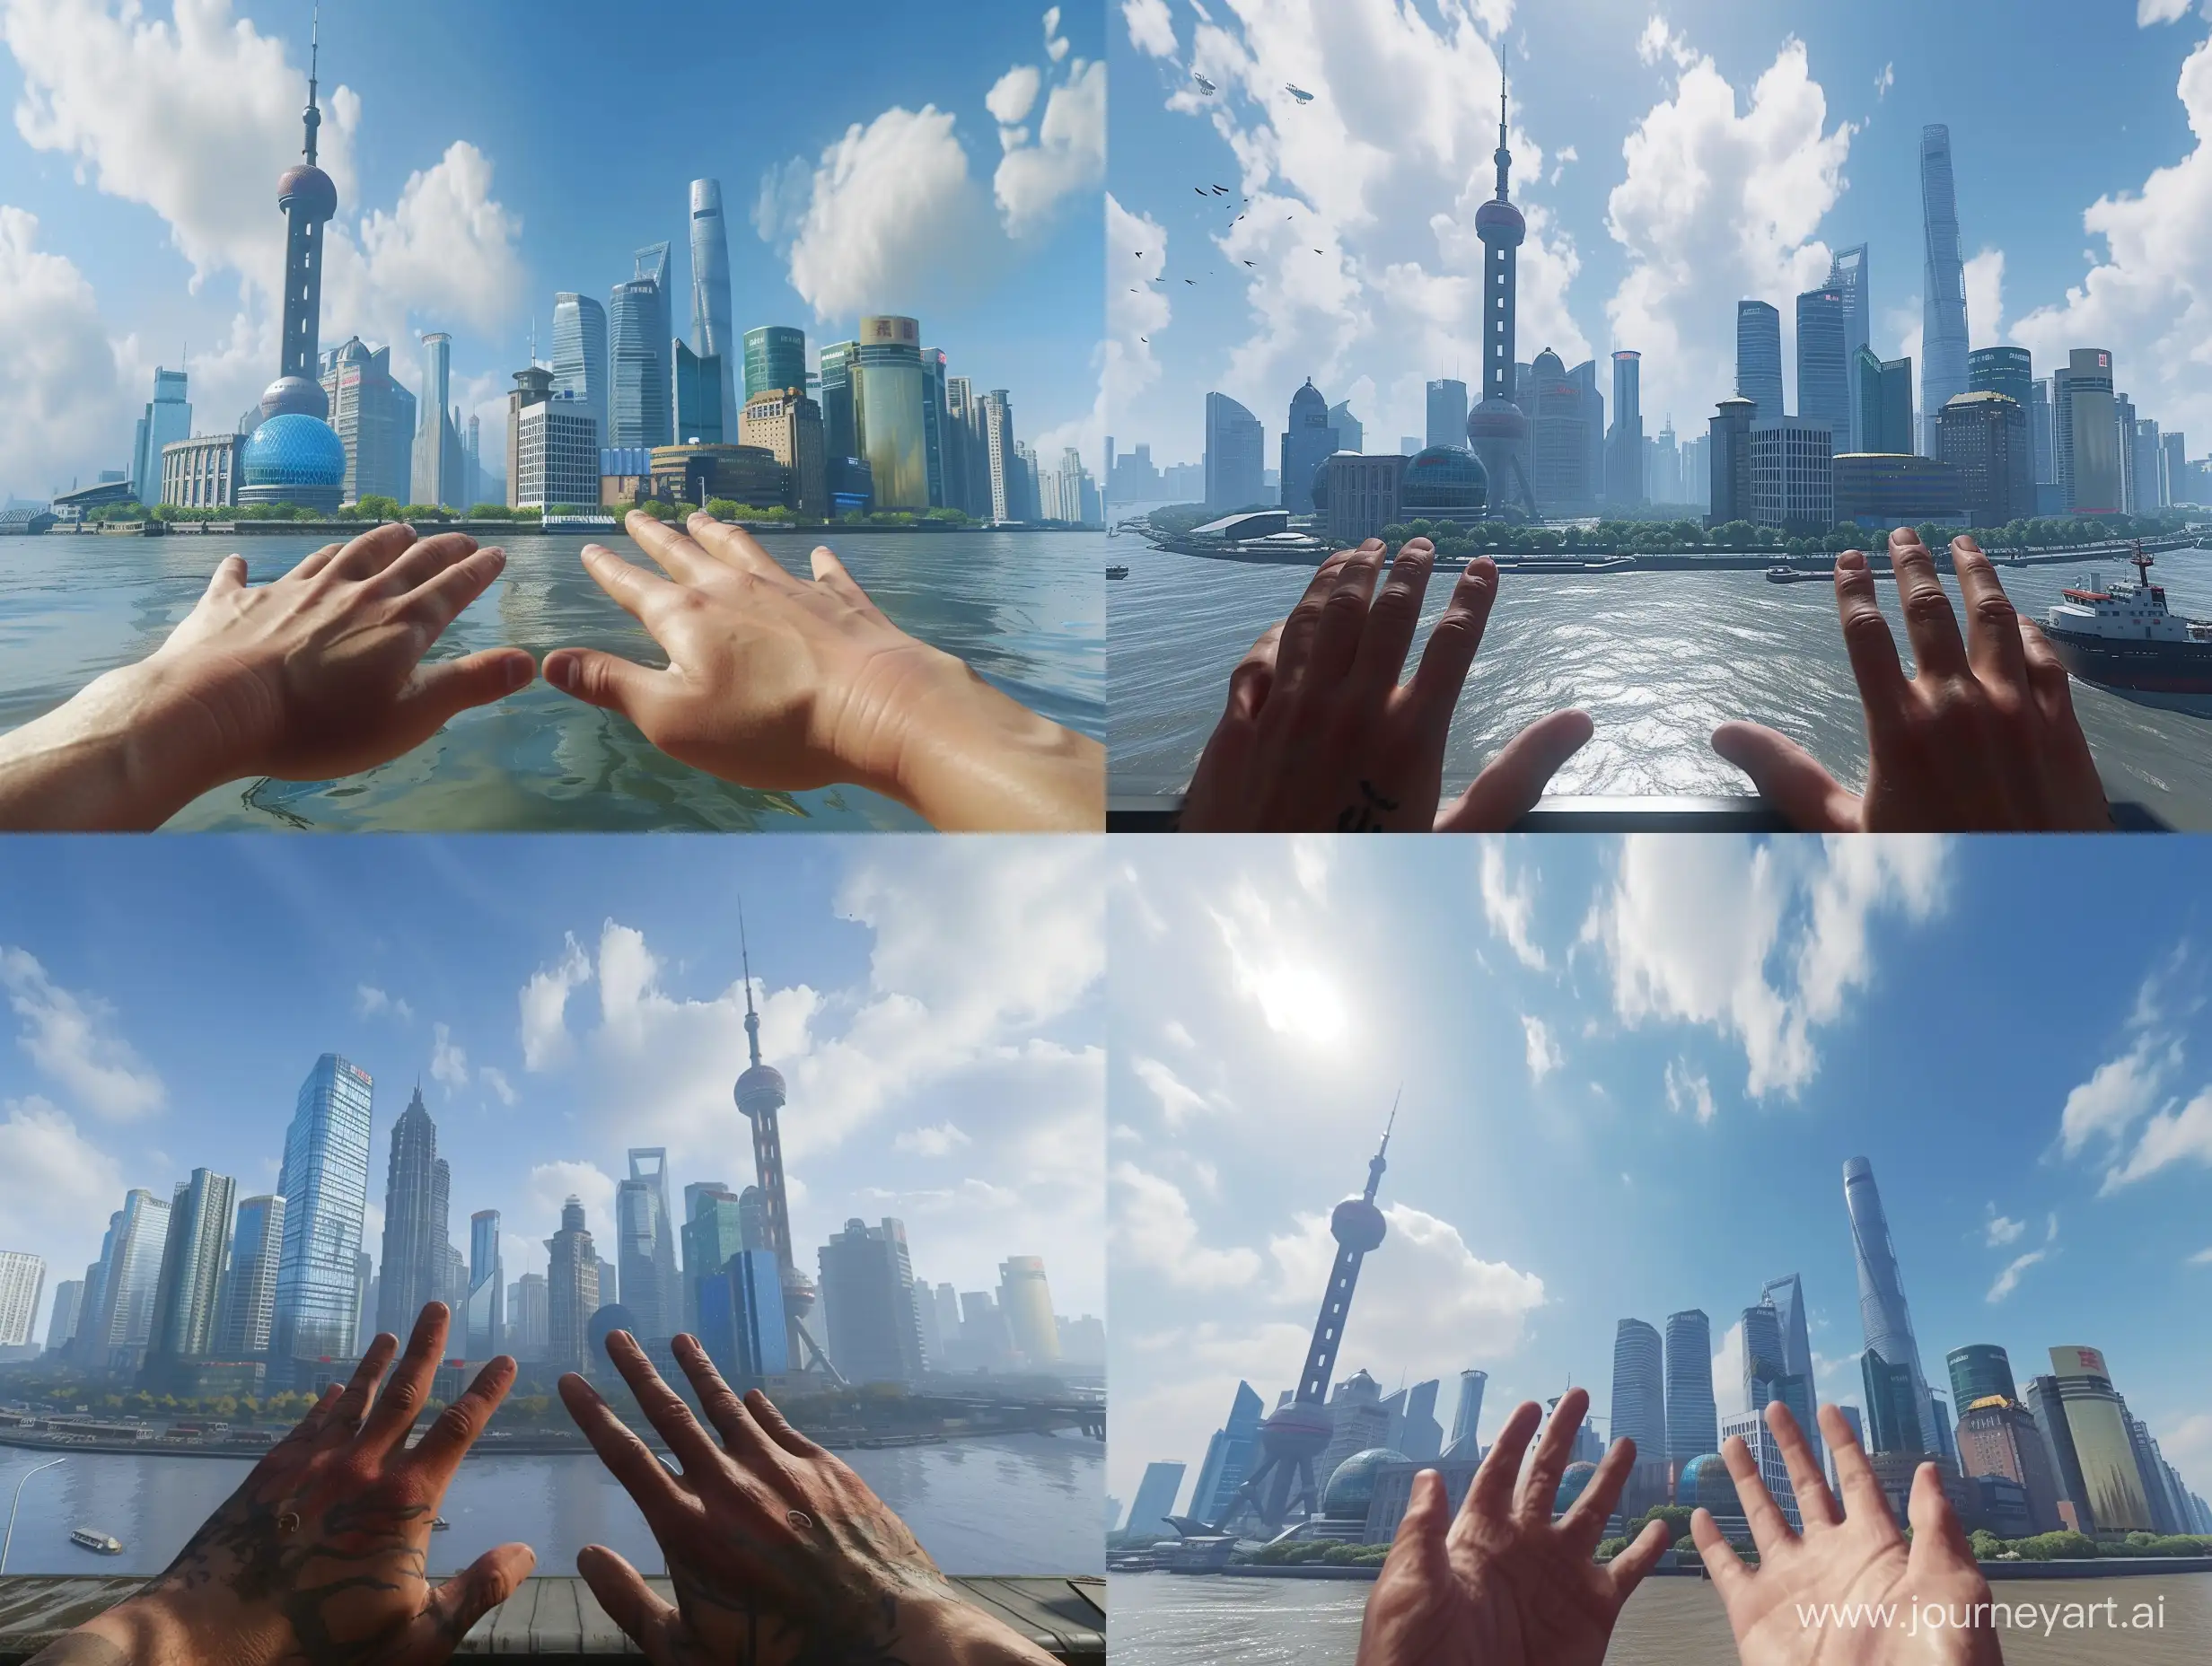 Take pictures of the open world environment in Shanghai city using natural lighting, from a first person perspective with hands visible at the bottom.